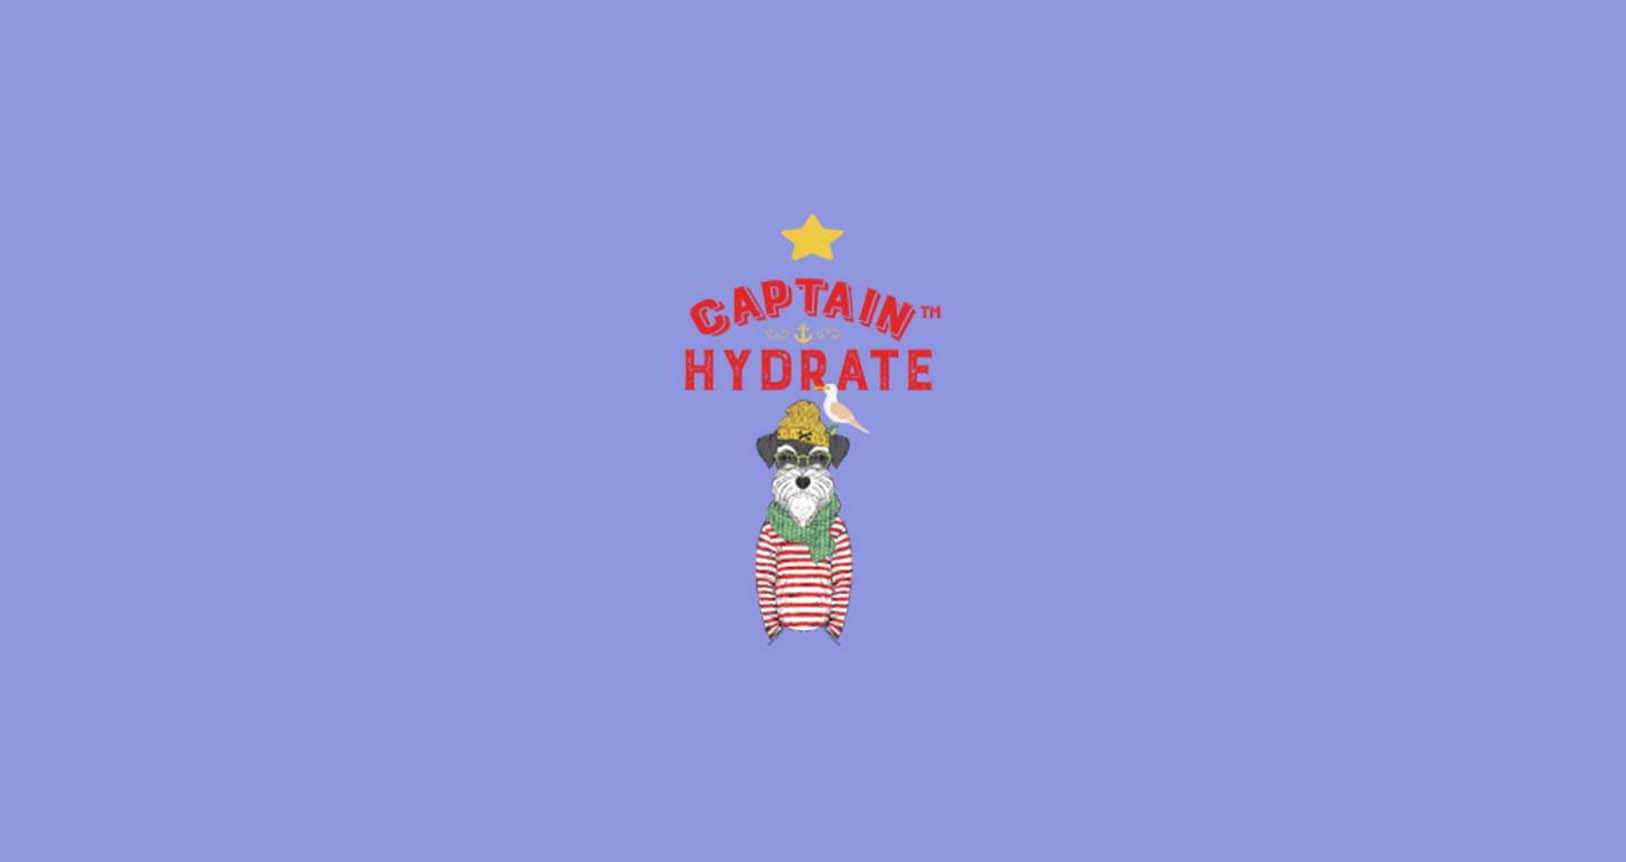 CAPTAIN-HYDRATE-TOP-WIDE-BANNER